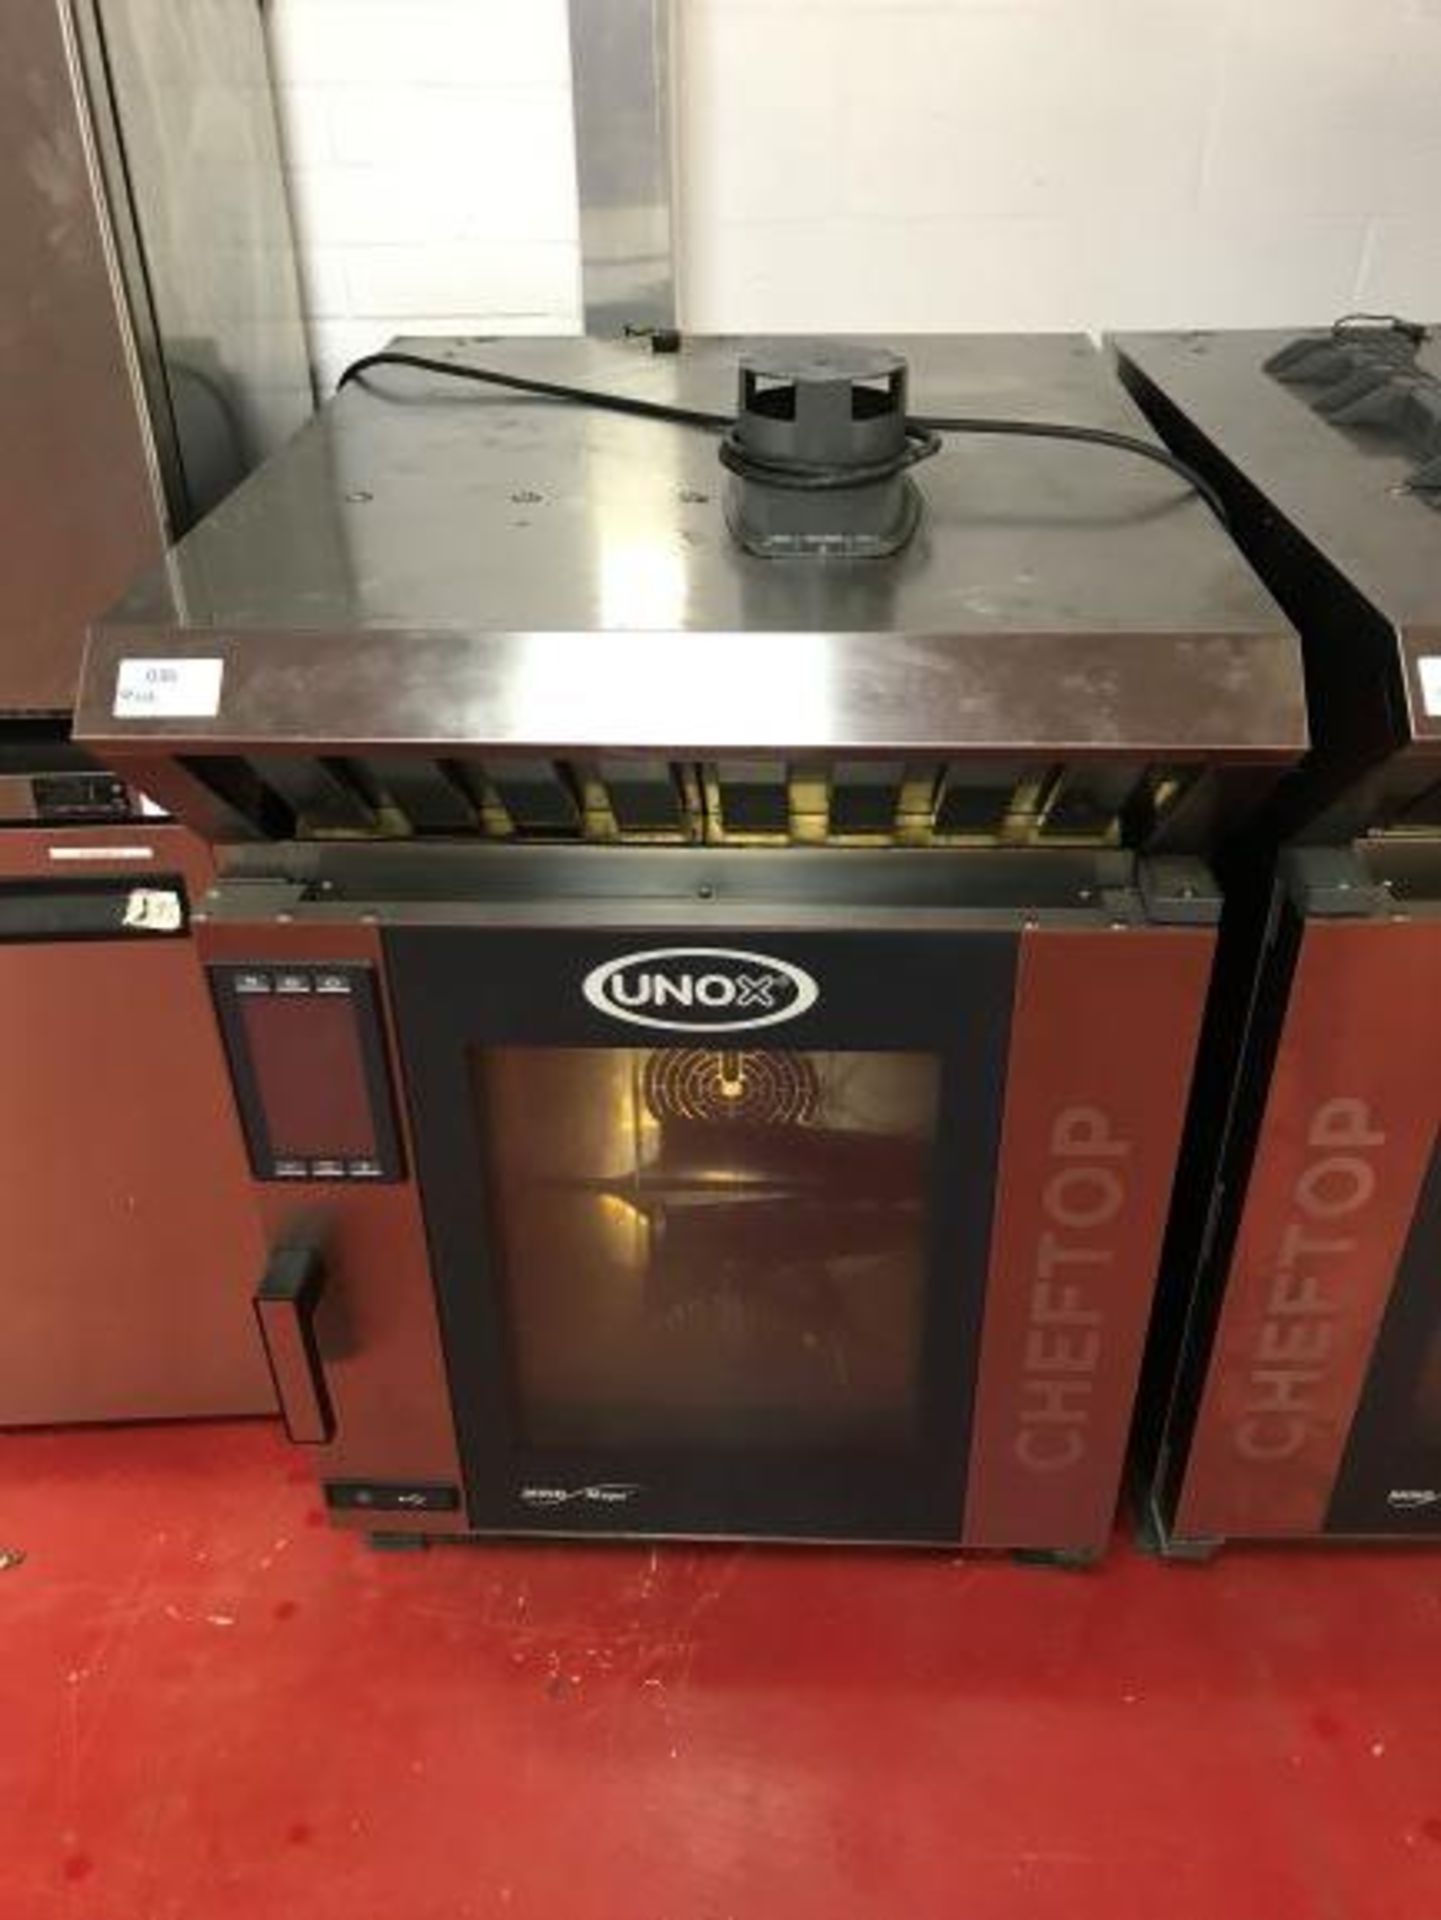 Unox Cheftop MIND Maps Plus Combi Oven 7xGN 1/1 with Unox XEVHC-HC11 hood with steam condenser - Image 3 of 3